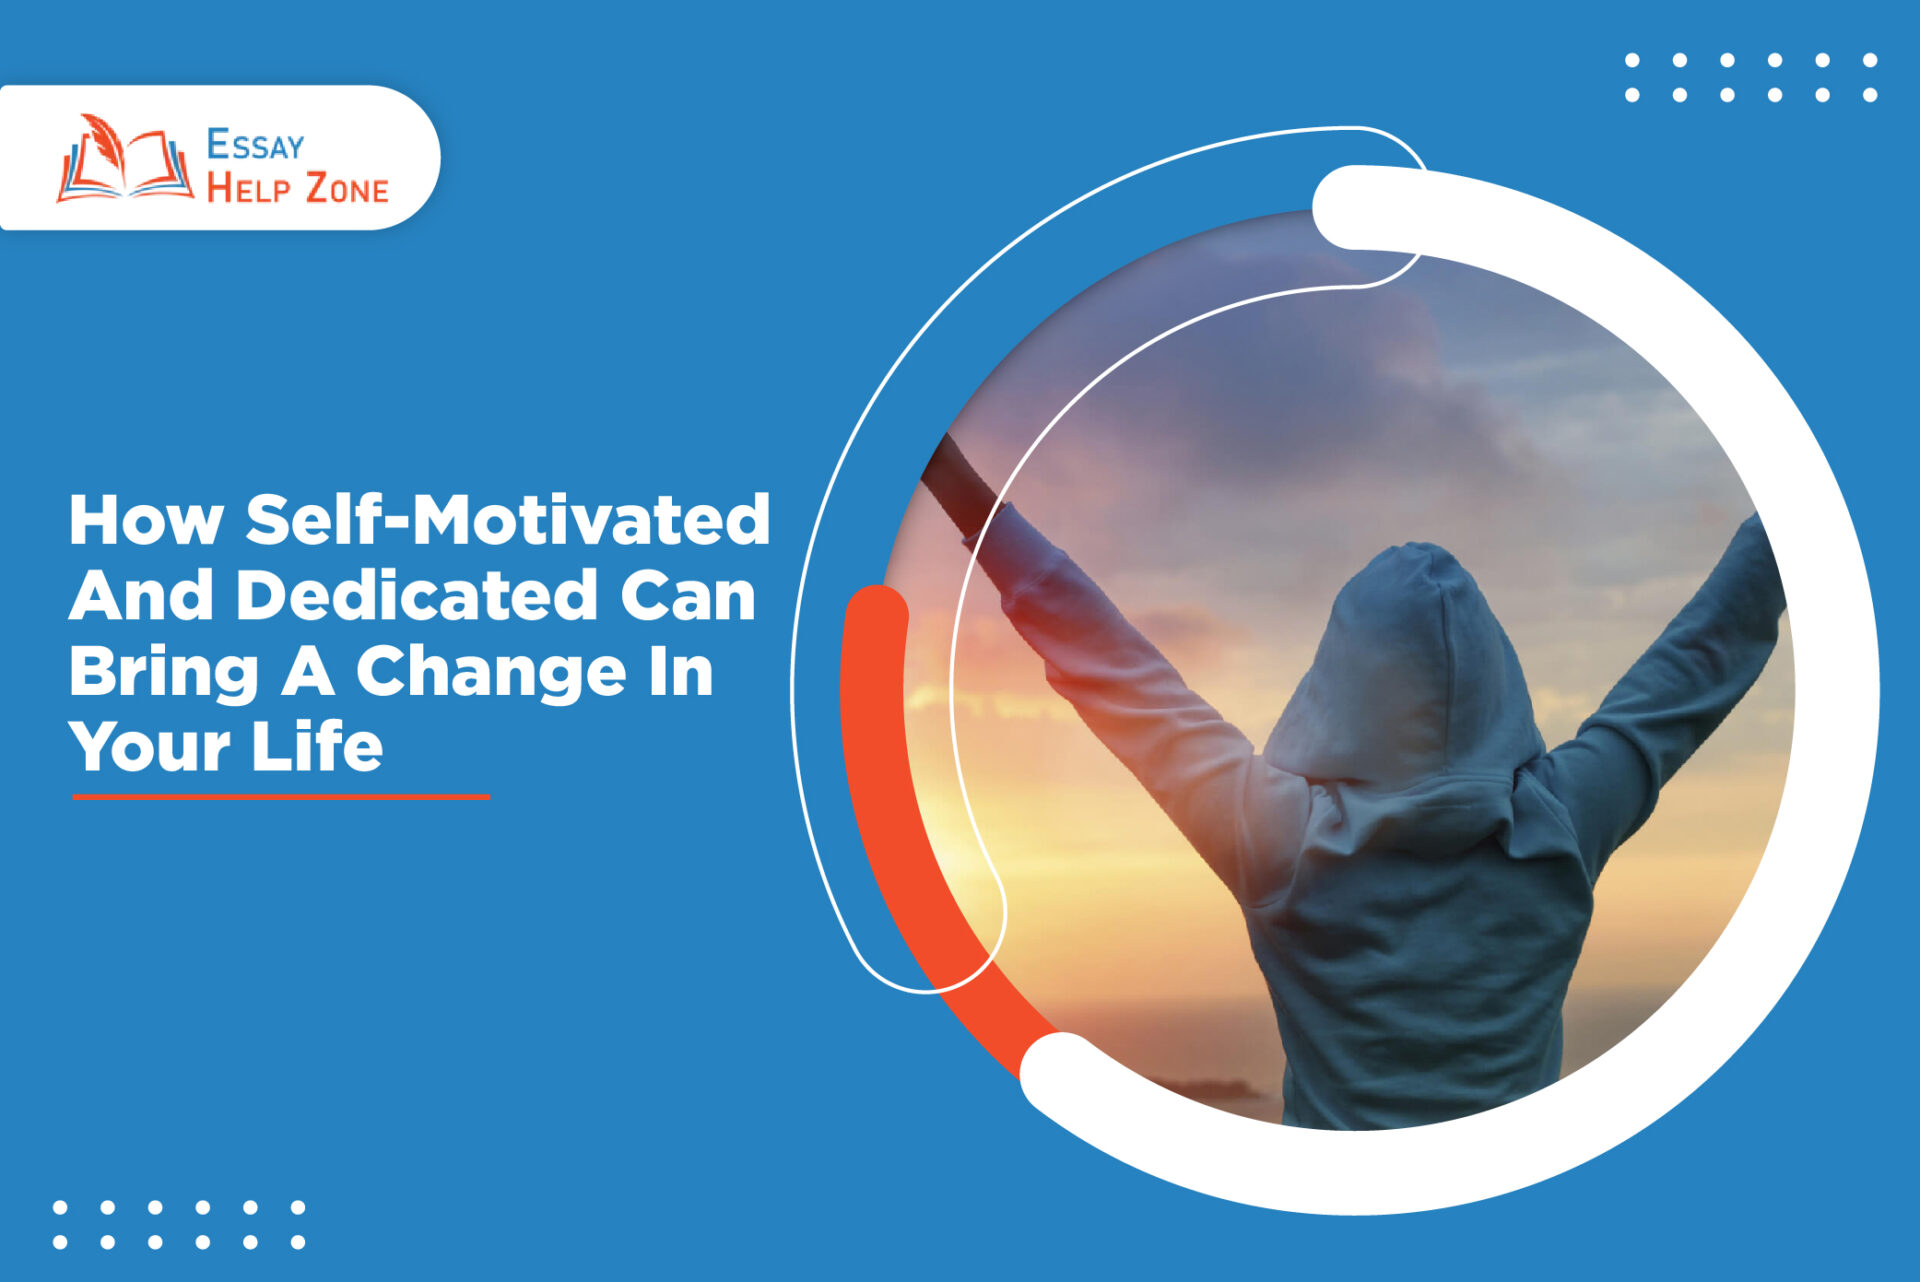 How Self-Motivated And Dedicated Can Bring A Change In Your Life In 2022 post thumbnail image